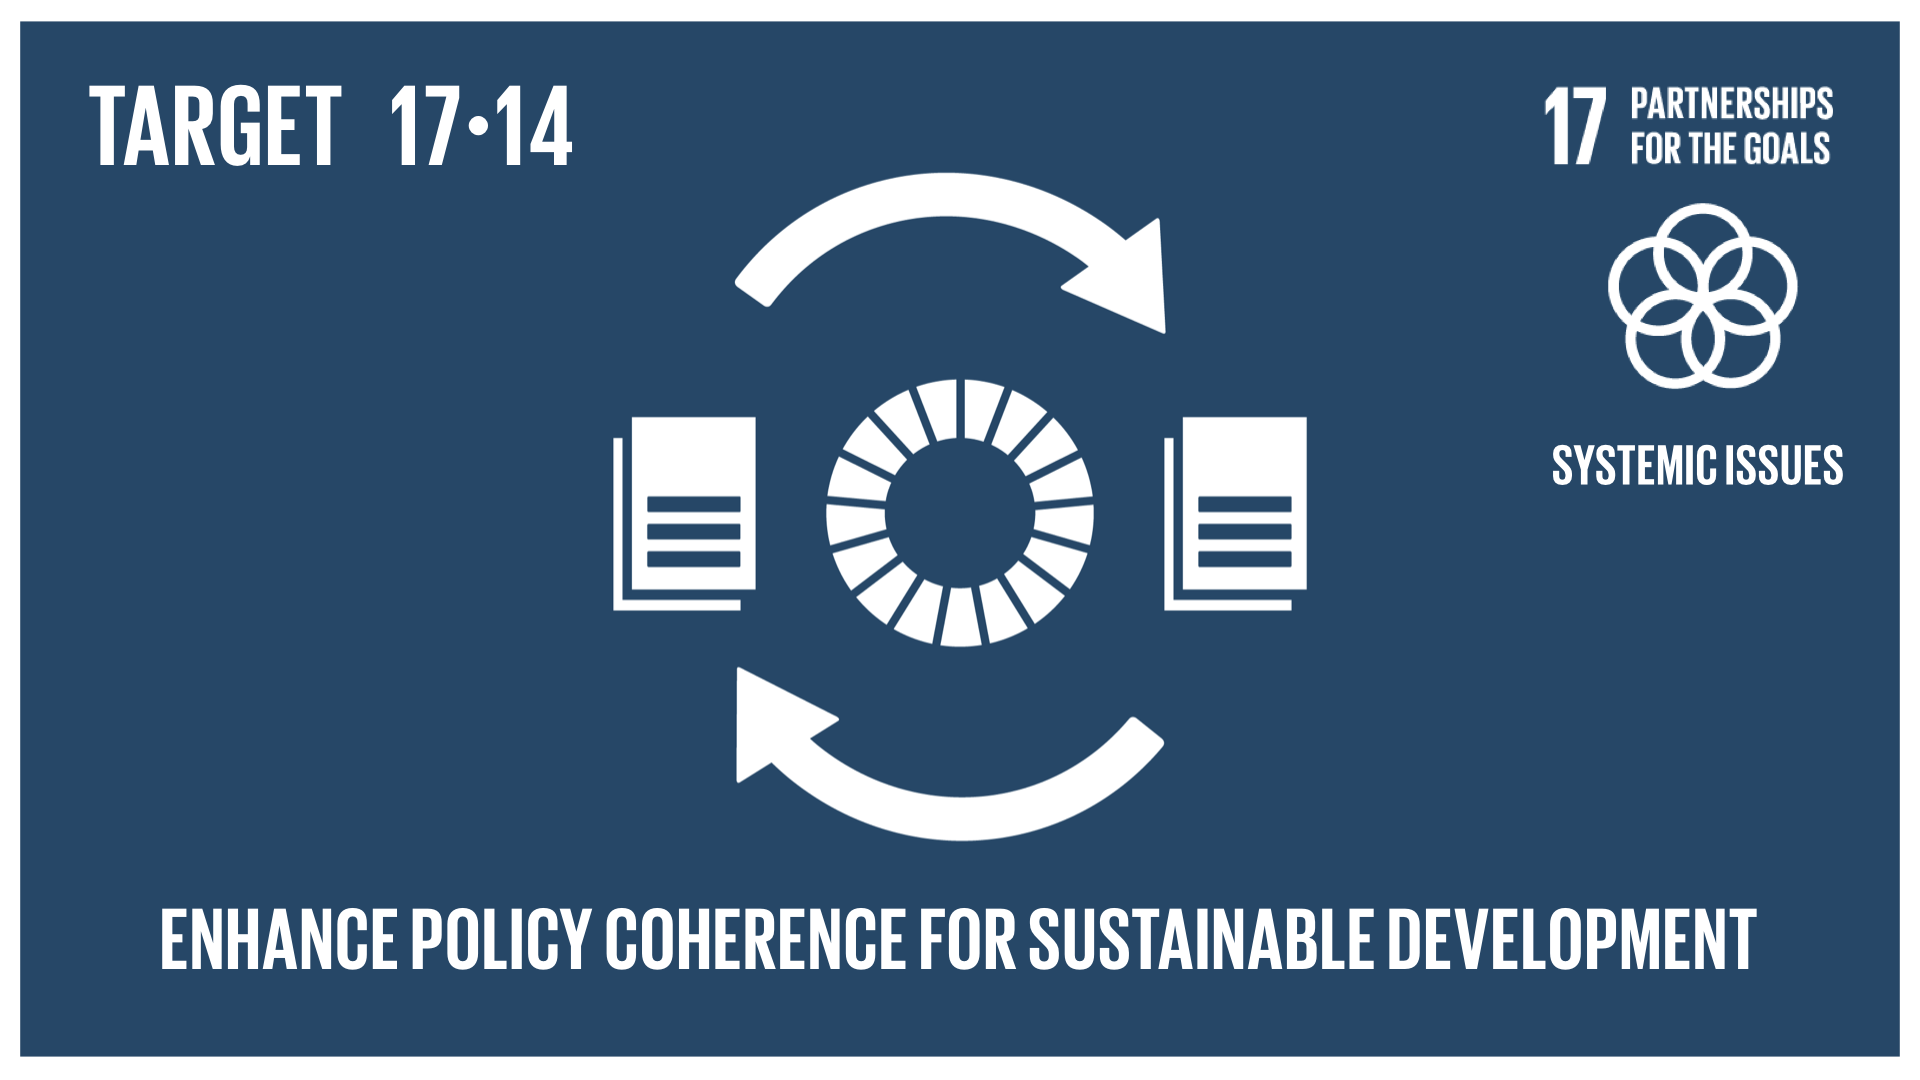 Graphic displaying the enhancement of policy coherence for sustainable development 